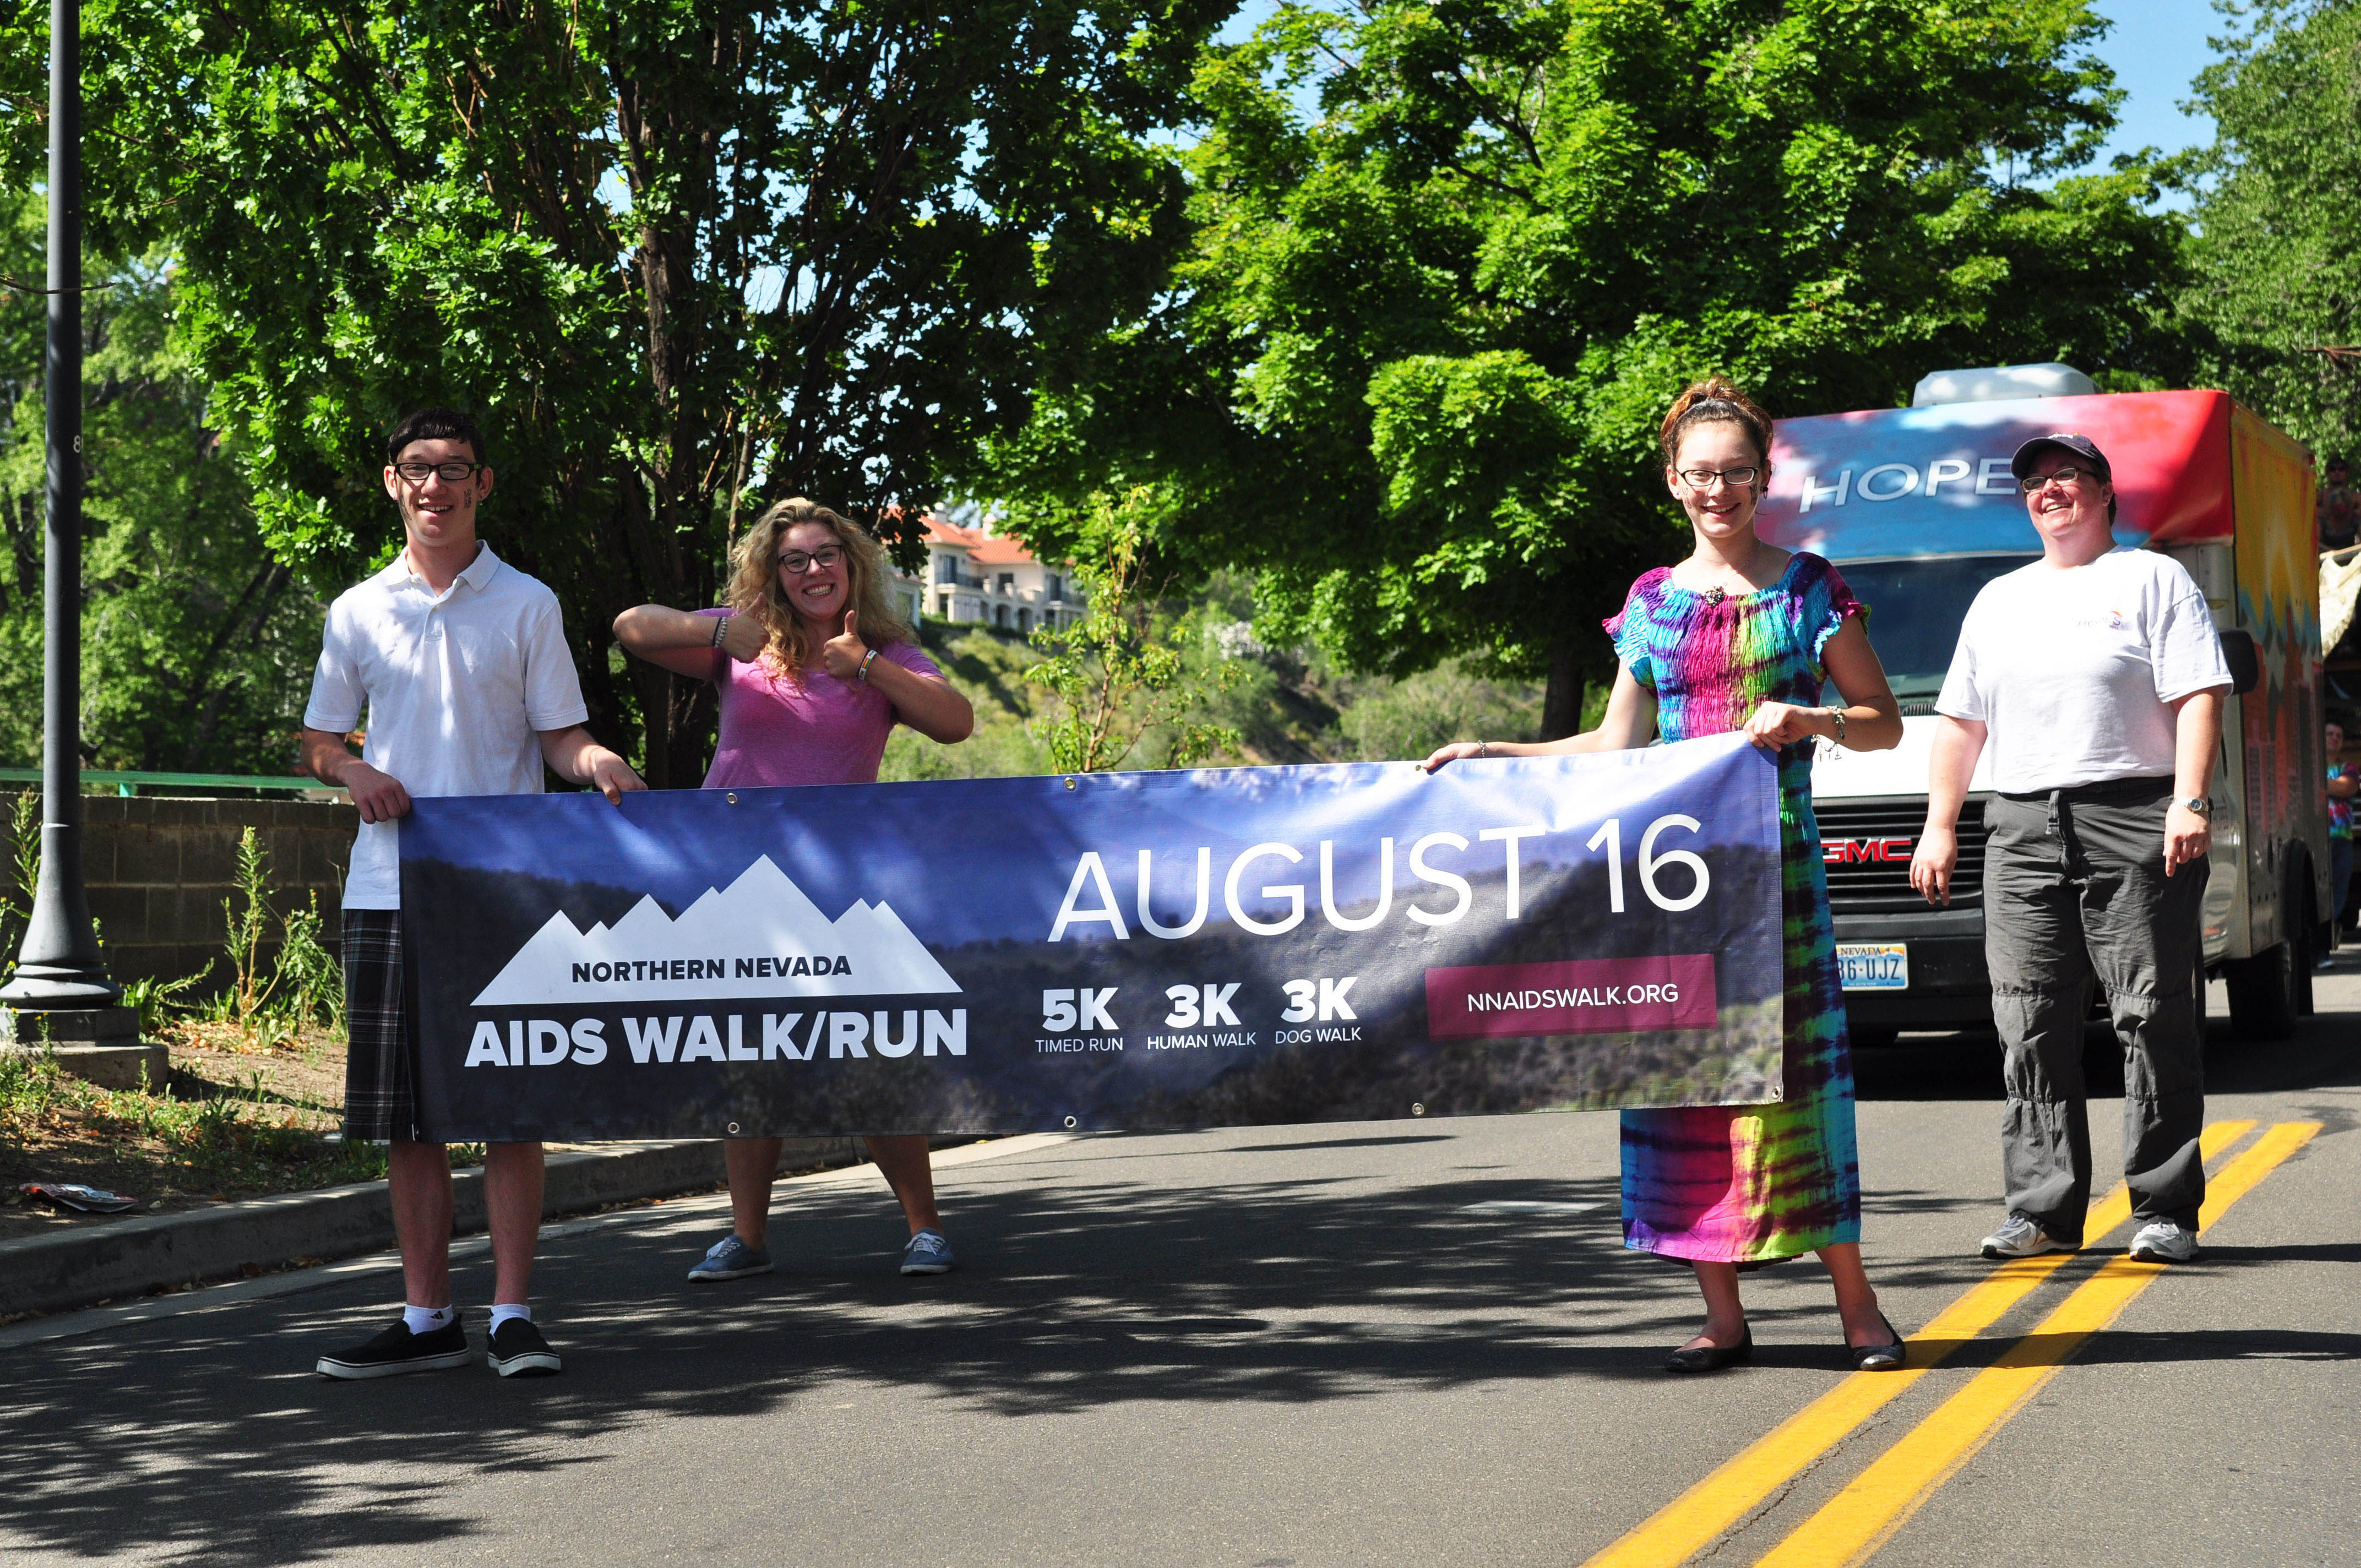 Highlights from the 2014 Northern Nevada Pride parade